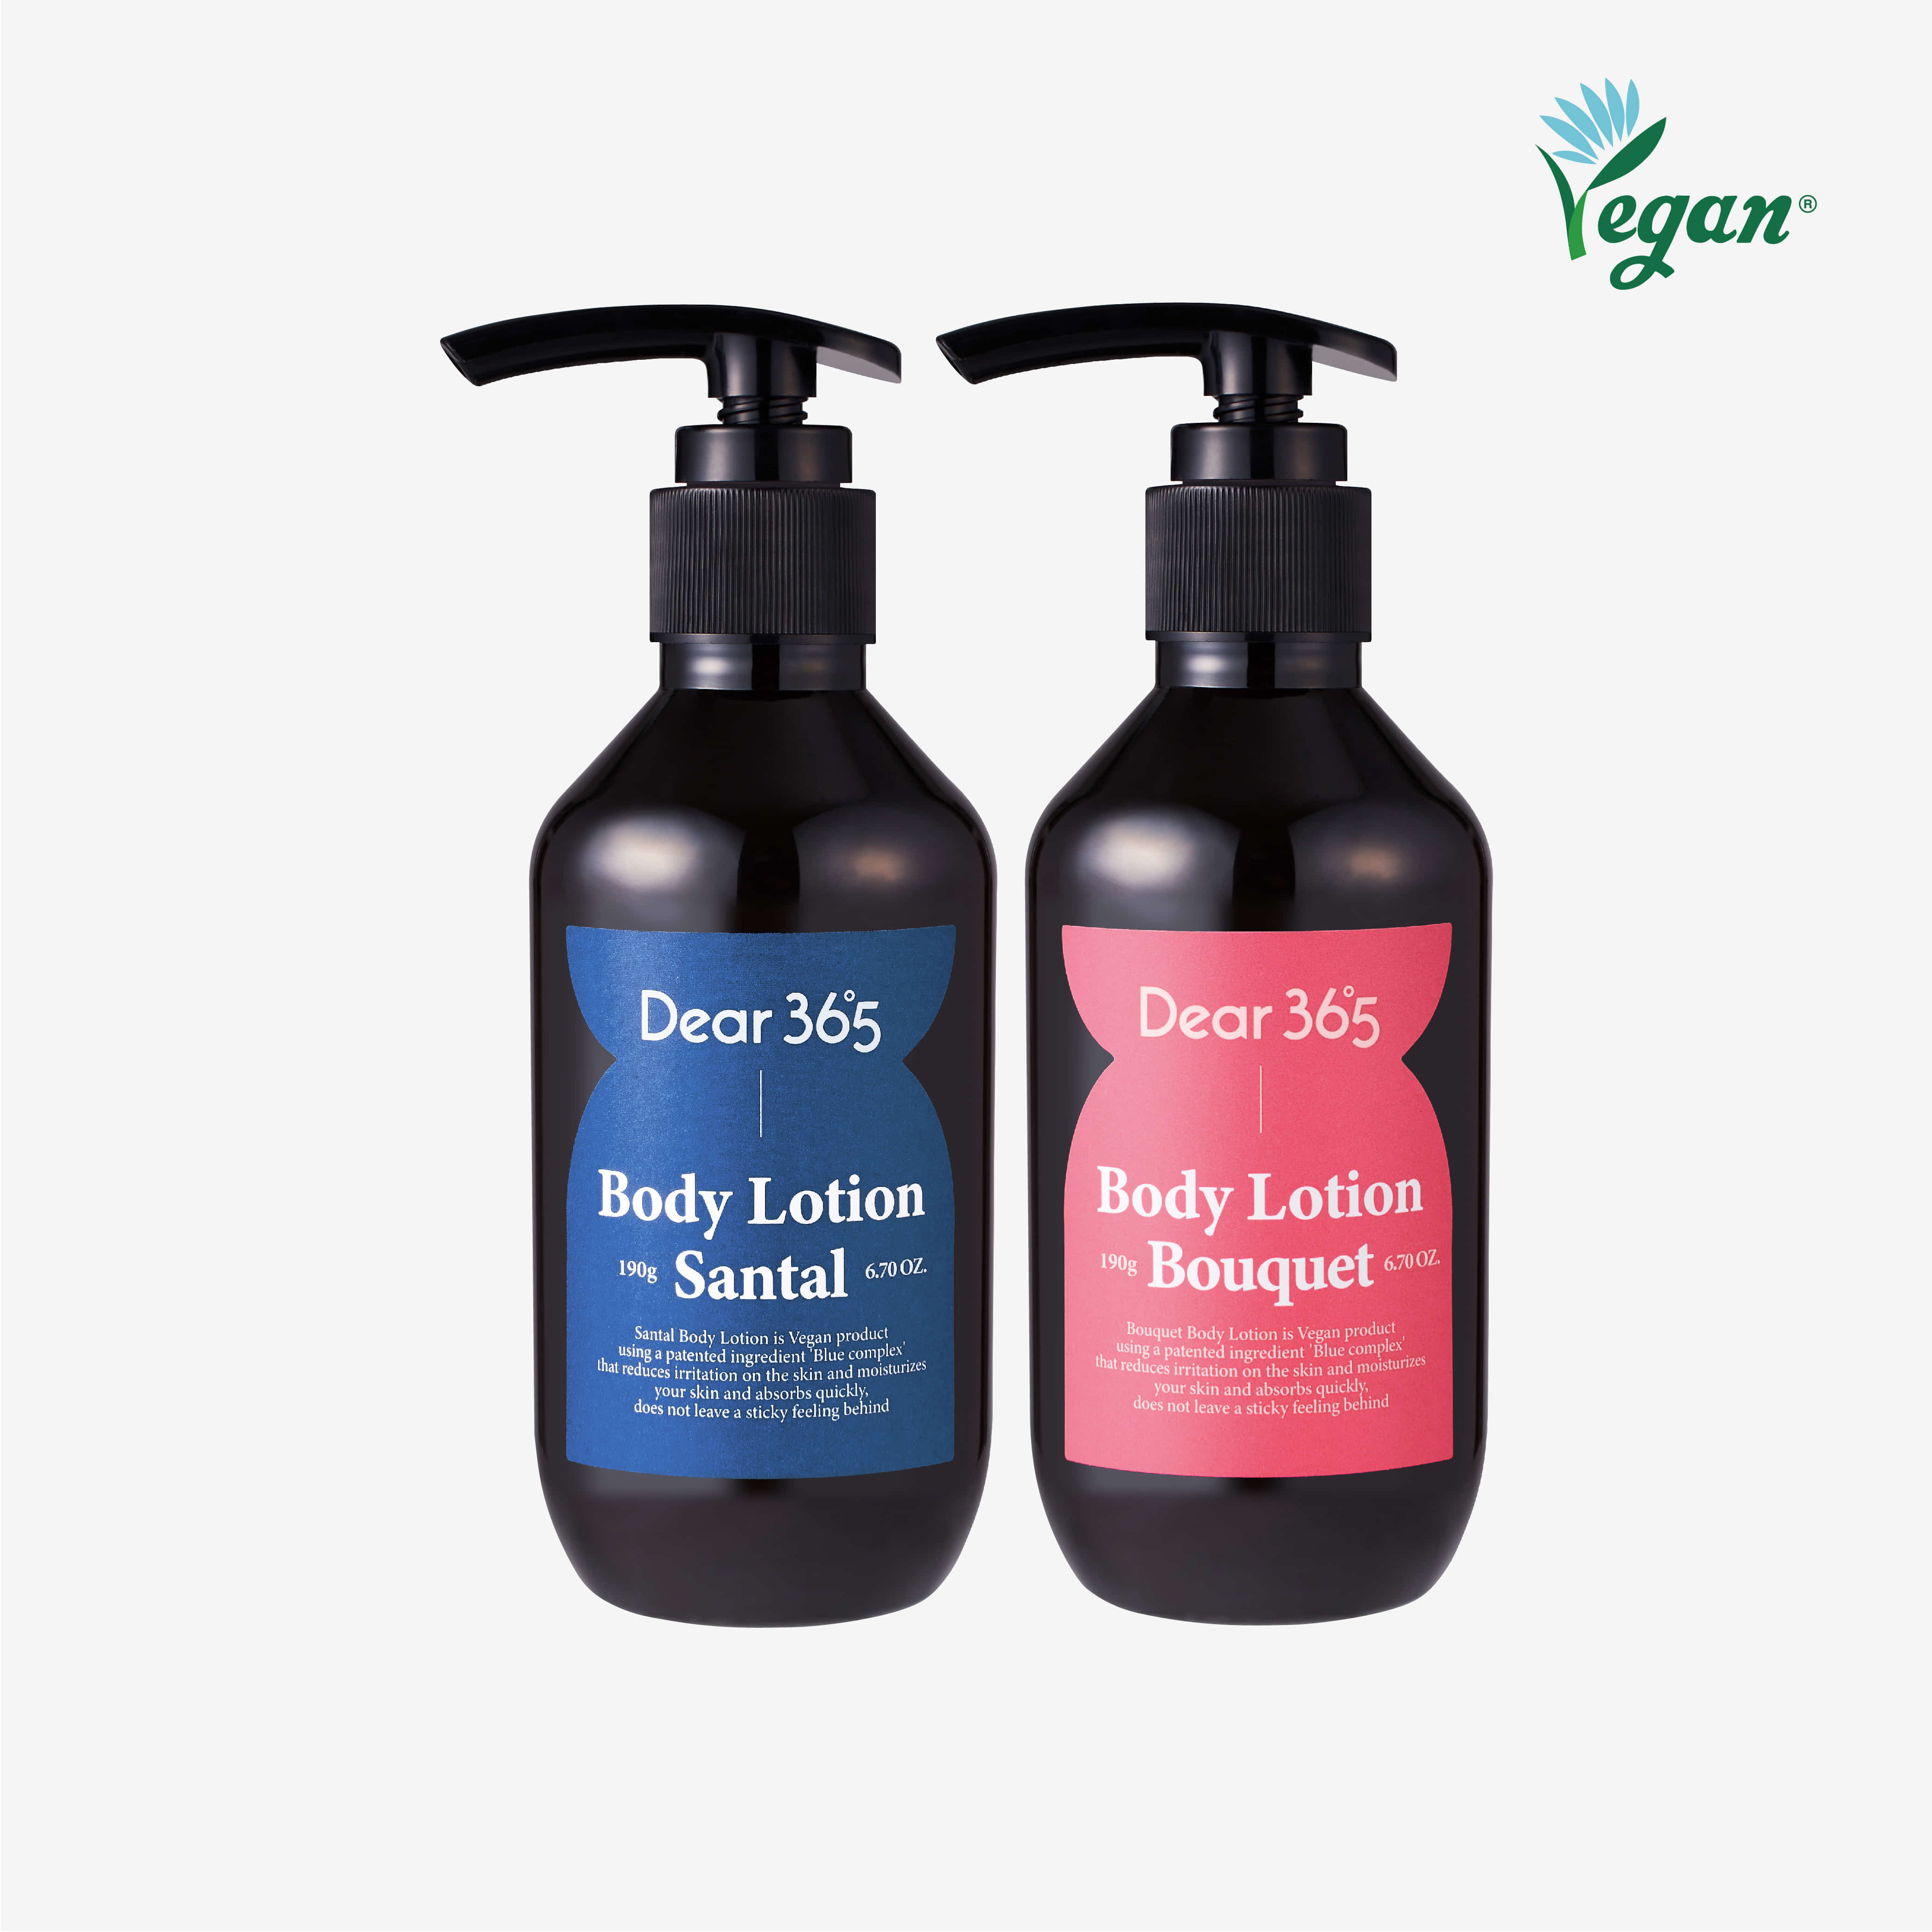 [EVENT] Vegan body lotion dual functionality